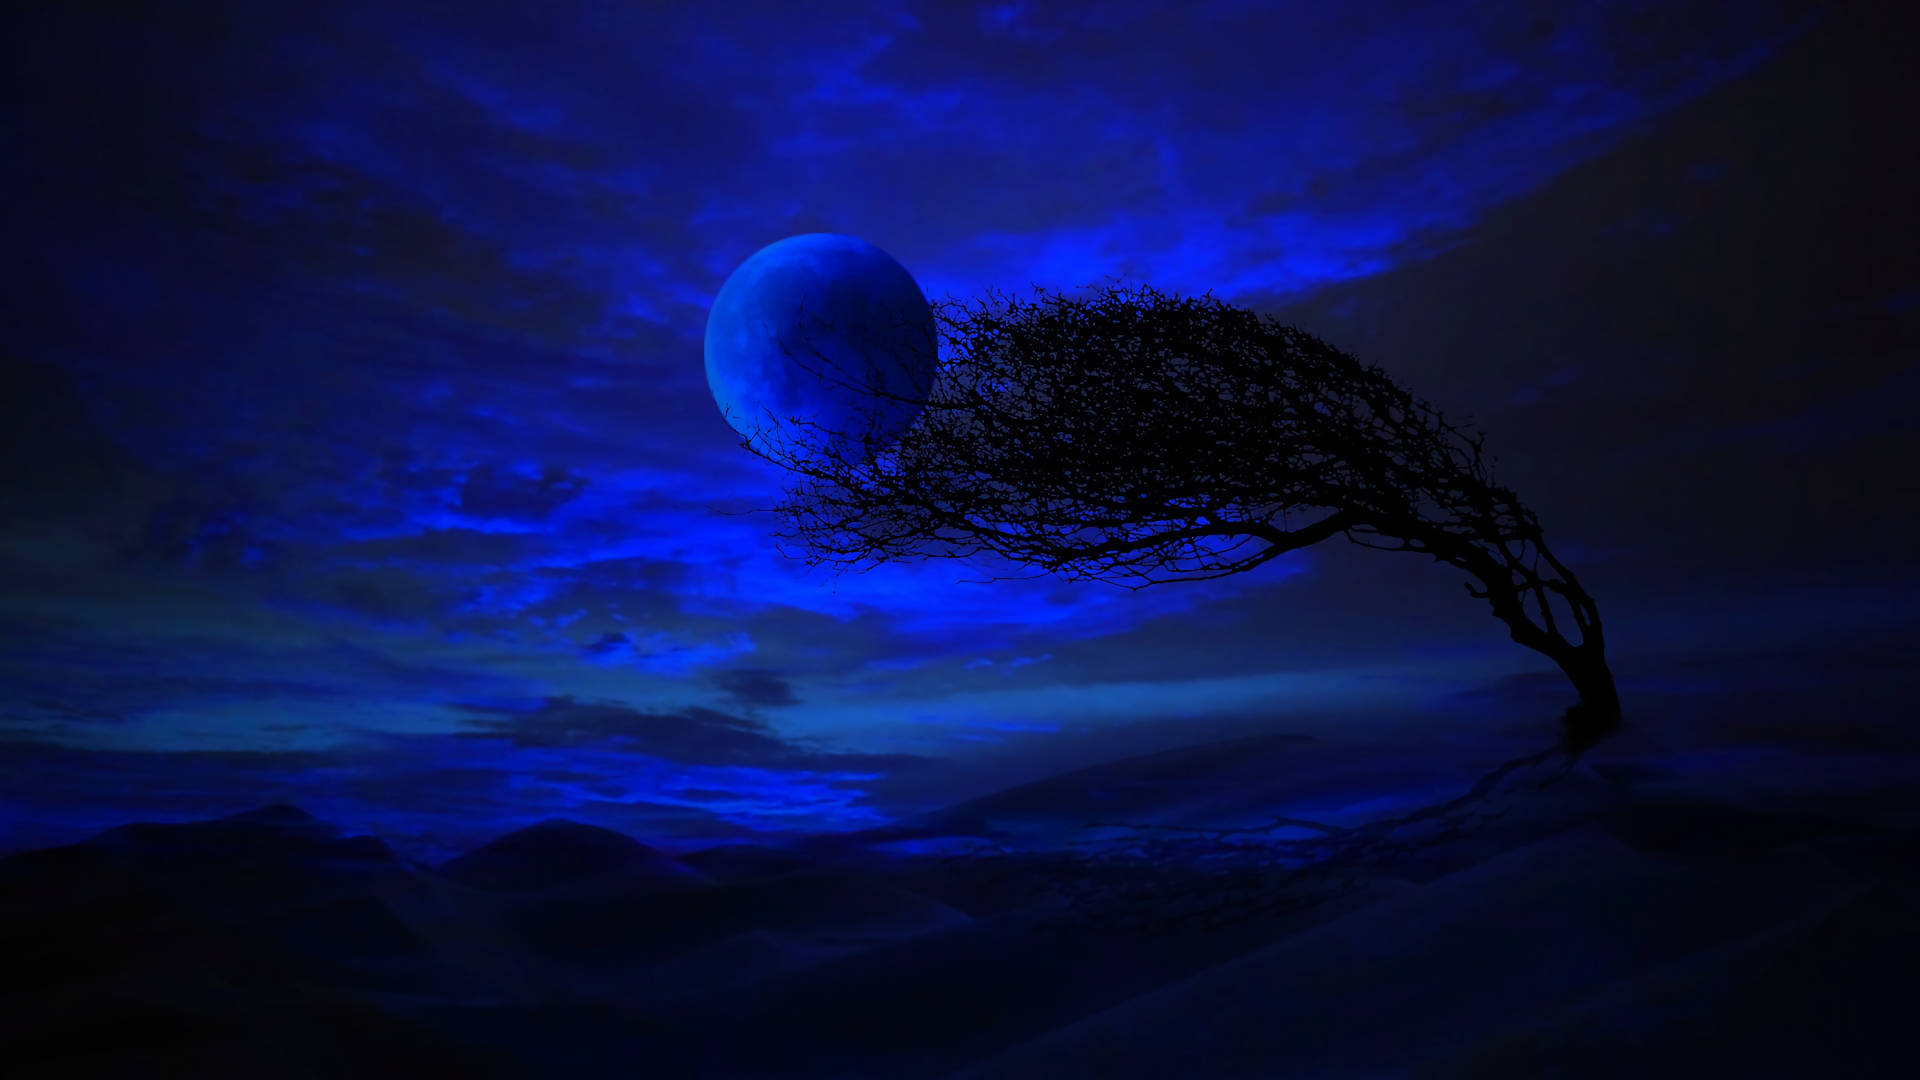 Artistic Blue-themed Hd Moon Background